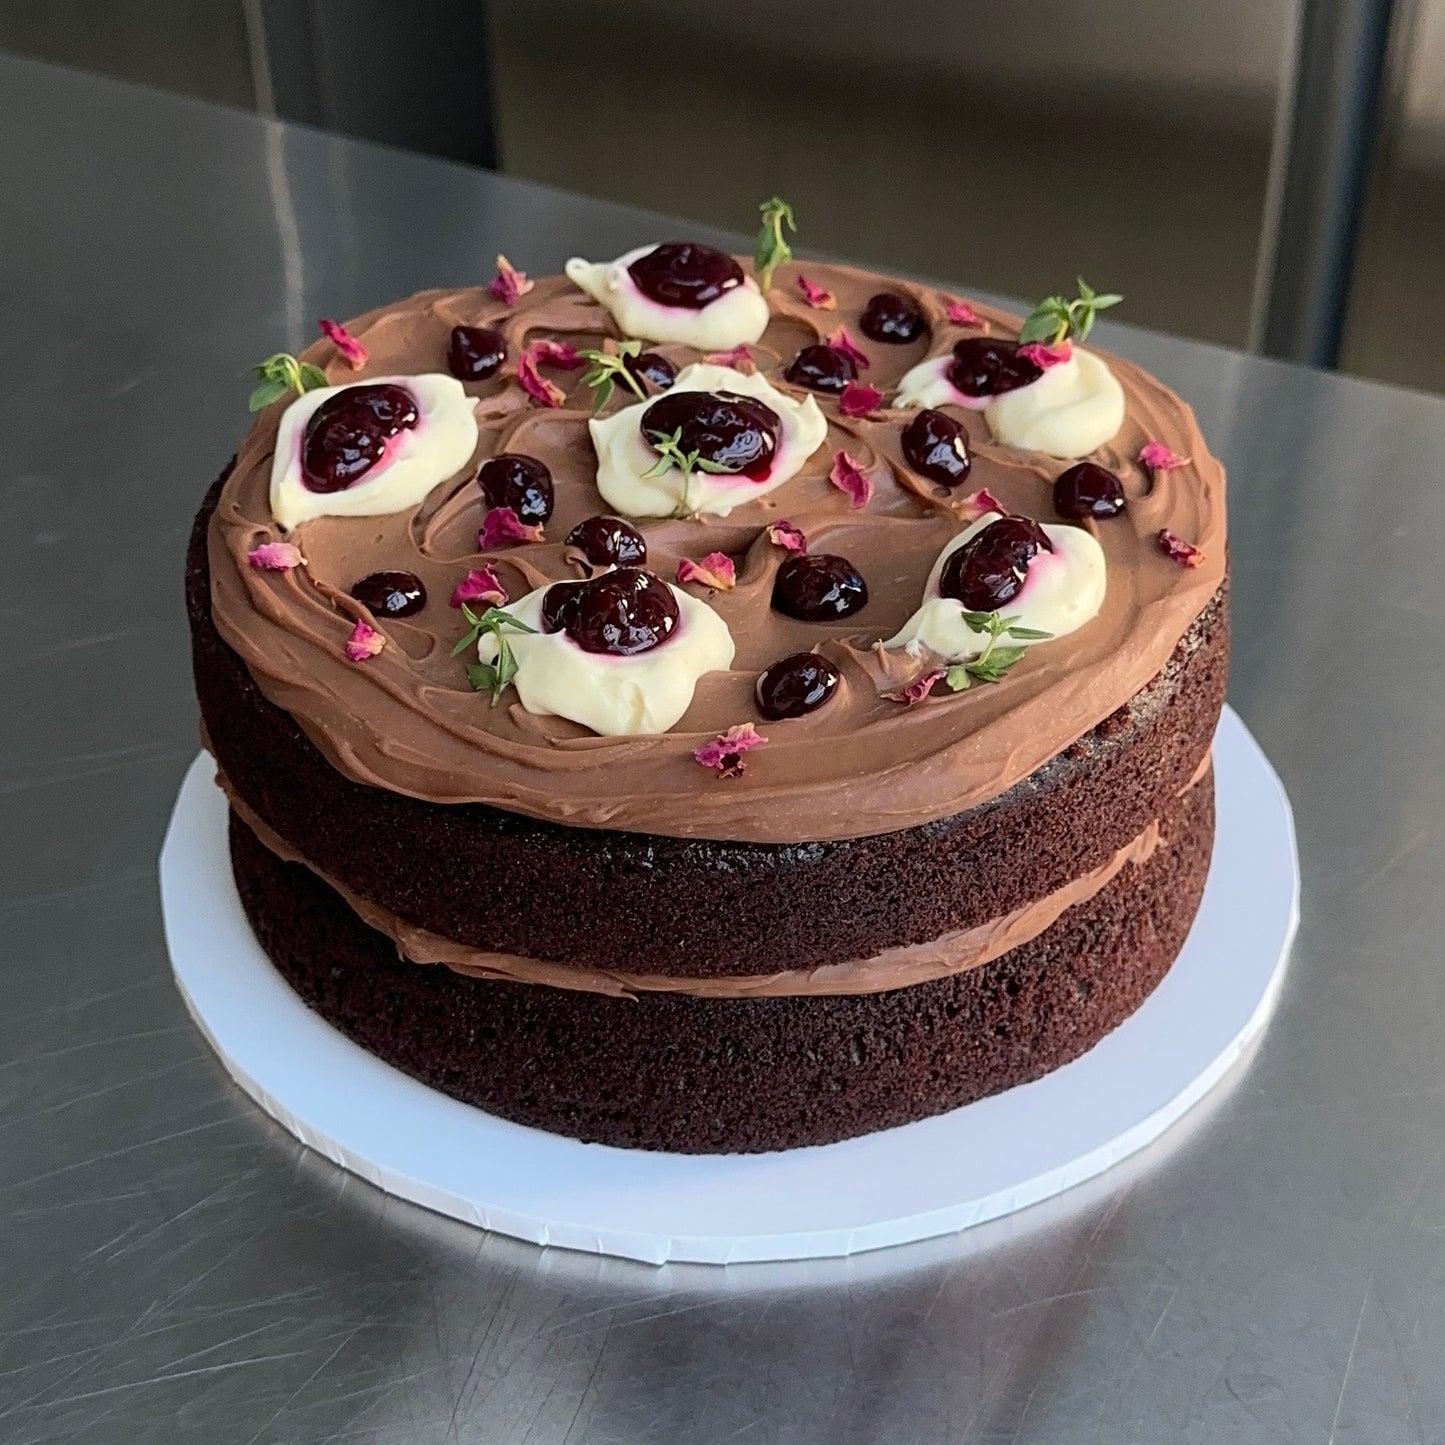 A two-layer chocolate sponge cake with a chocolate ganache filling and topped with a chocolate ganache and dollops of cream, boysenberry jam and a sprinkling of rose petals and thyme to decorate.